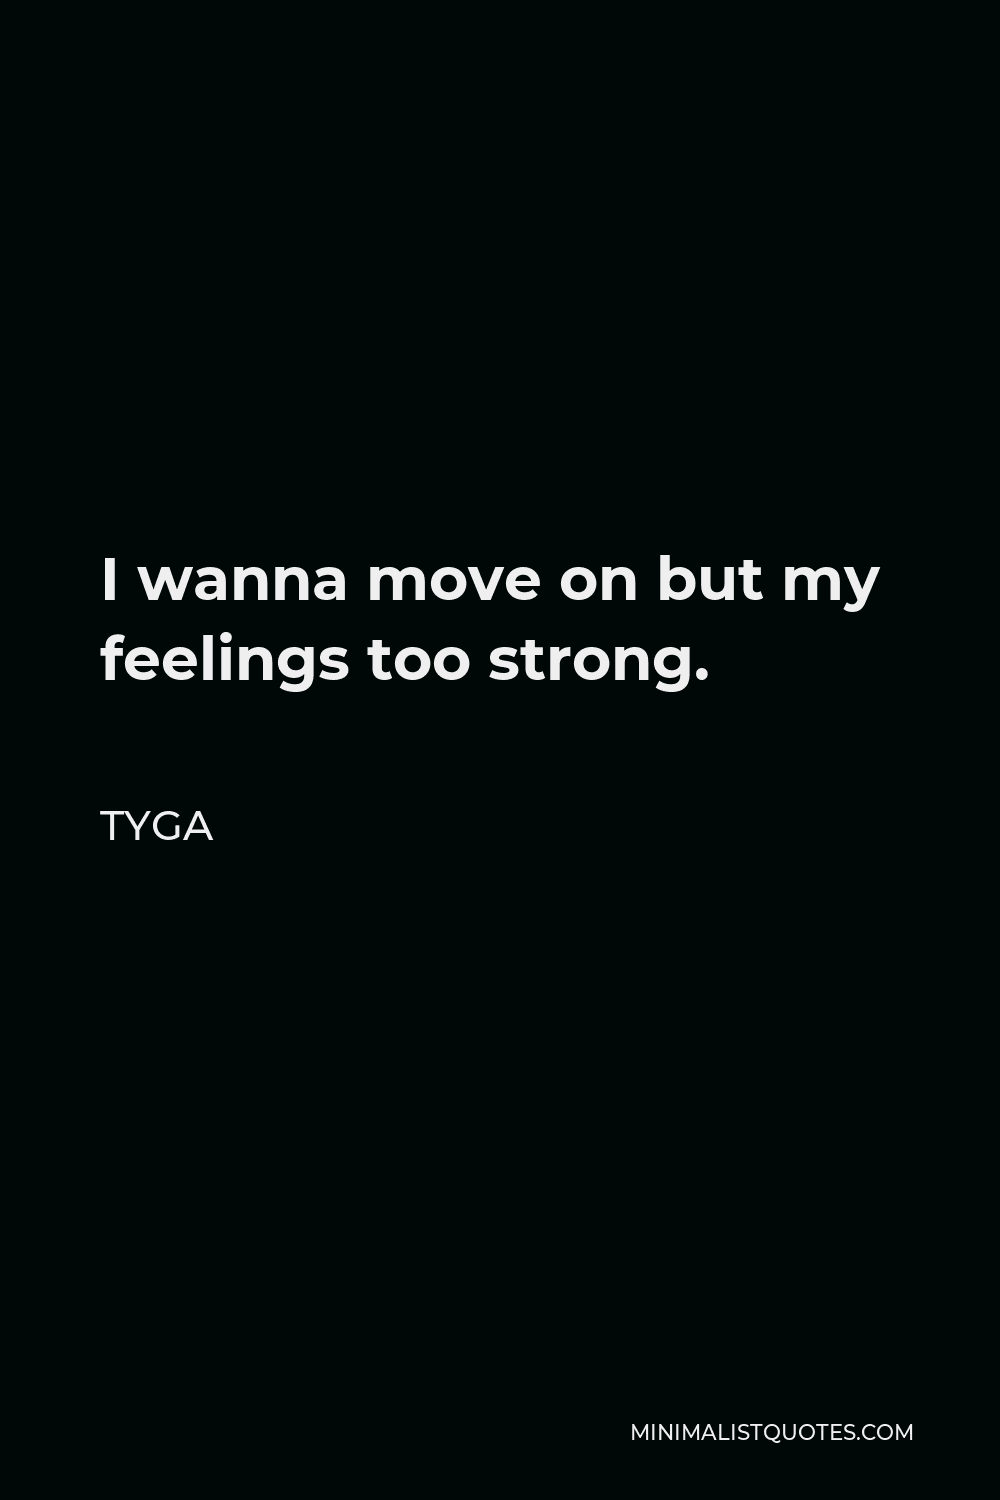 Tyga Quote - I wanna move on but my feelings too strong.